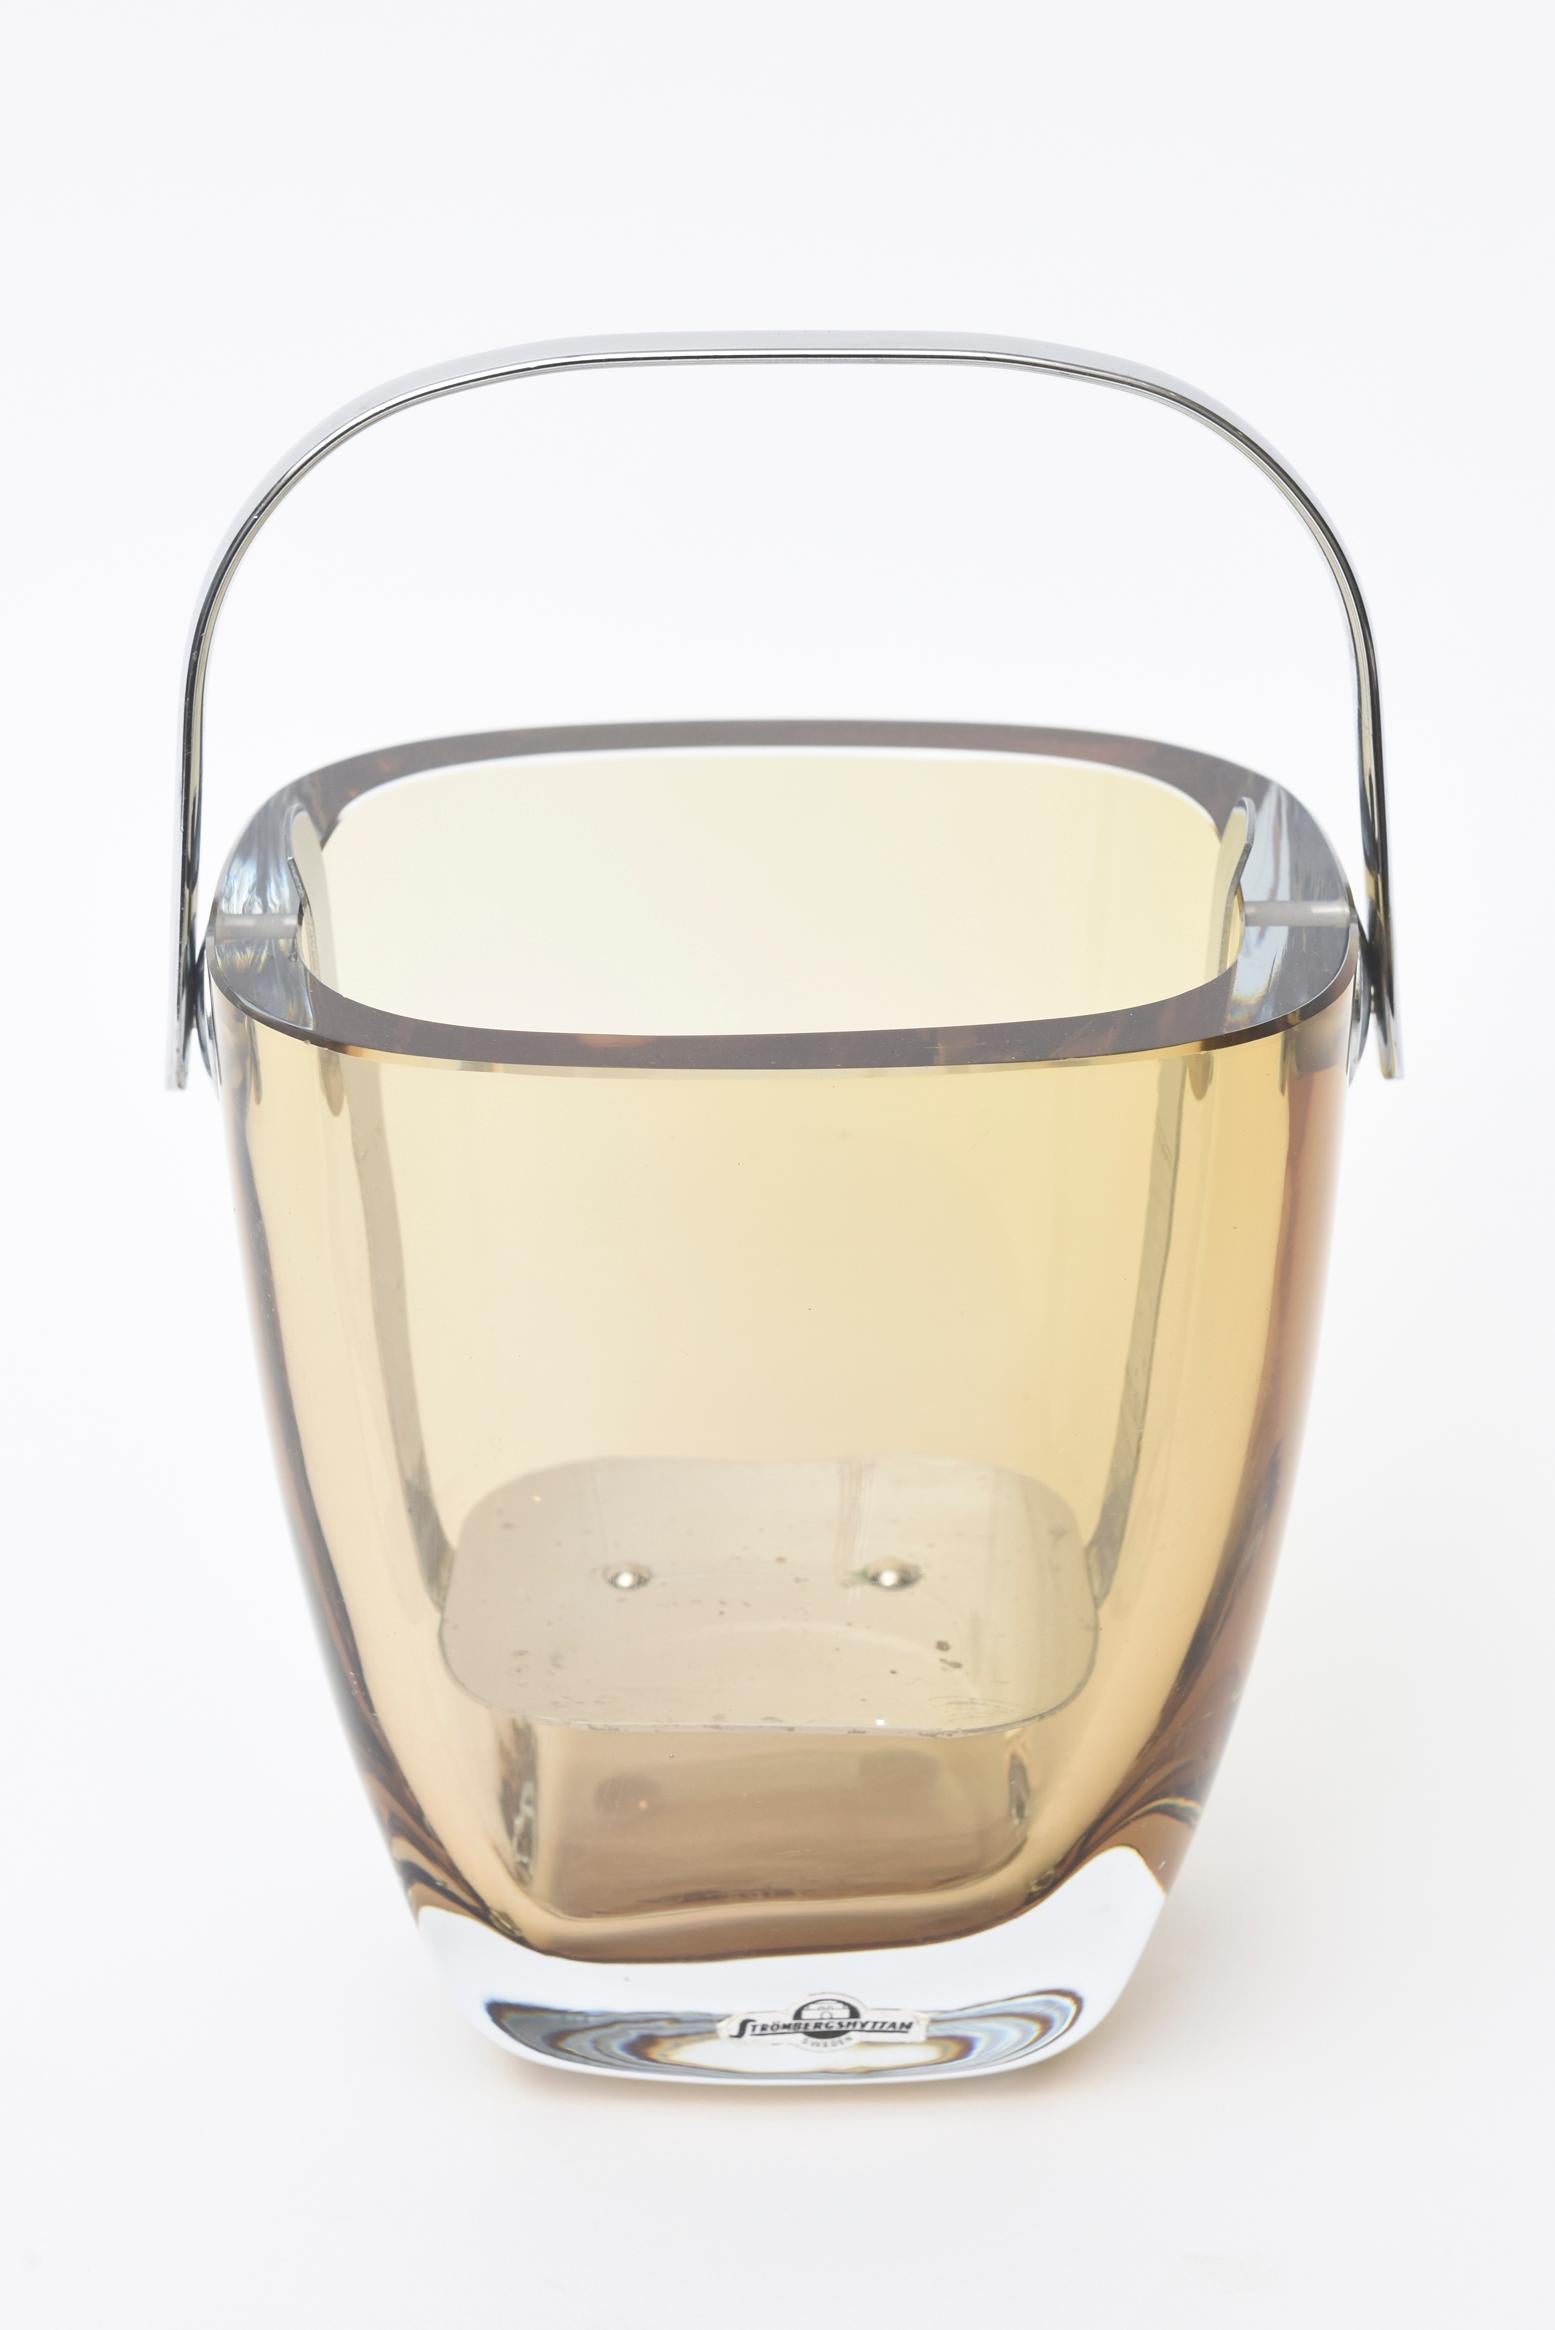 This lovely Scandinavian Modern hallmarked Strombergshyttan small vintage ice bucket is transparent amber tinted glass with a modern chrome handle. It has the original ice stand inside. The top is flat cut pulsed glass and is from the 1960s. The